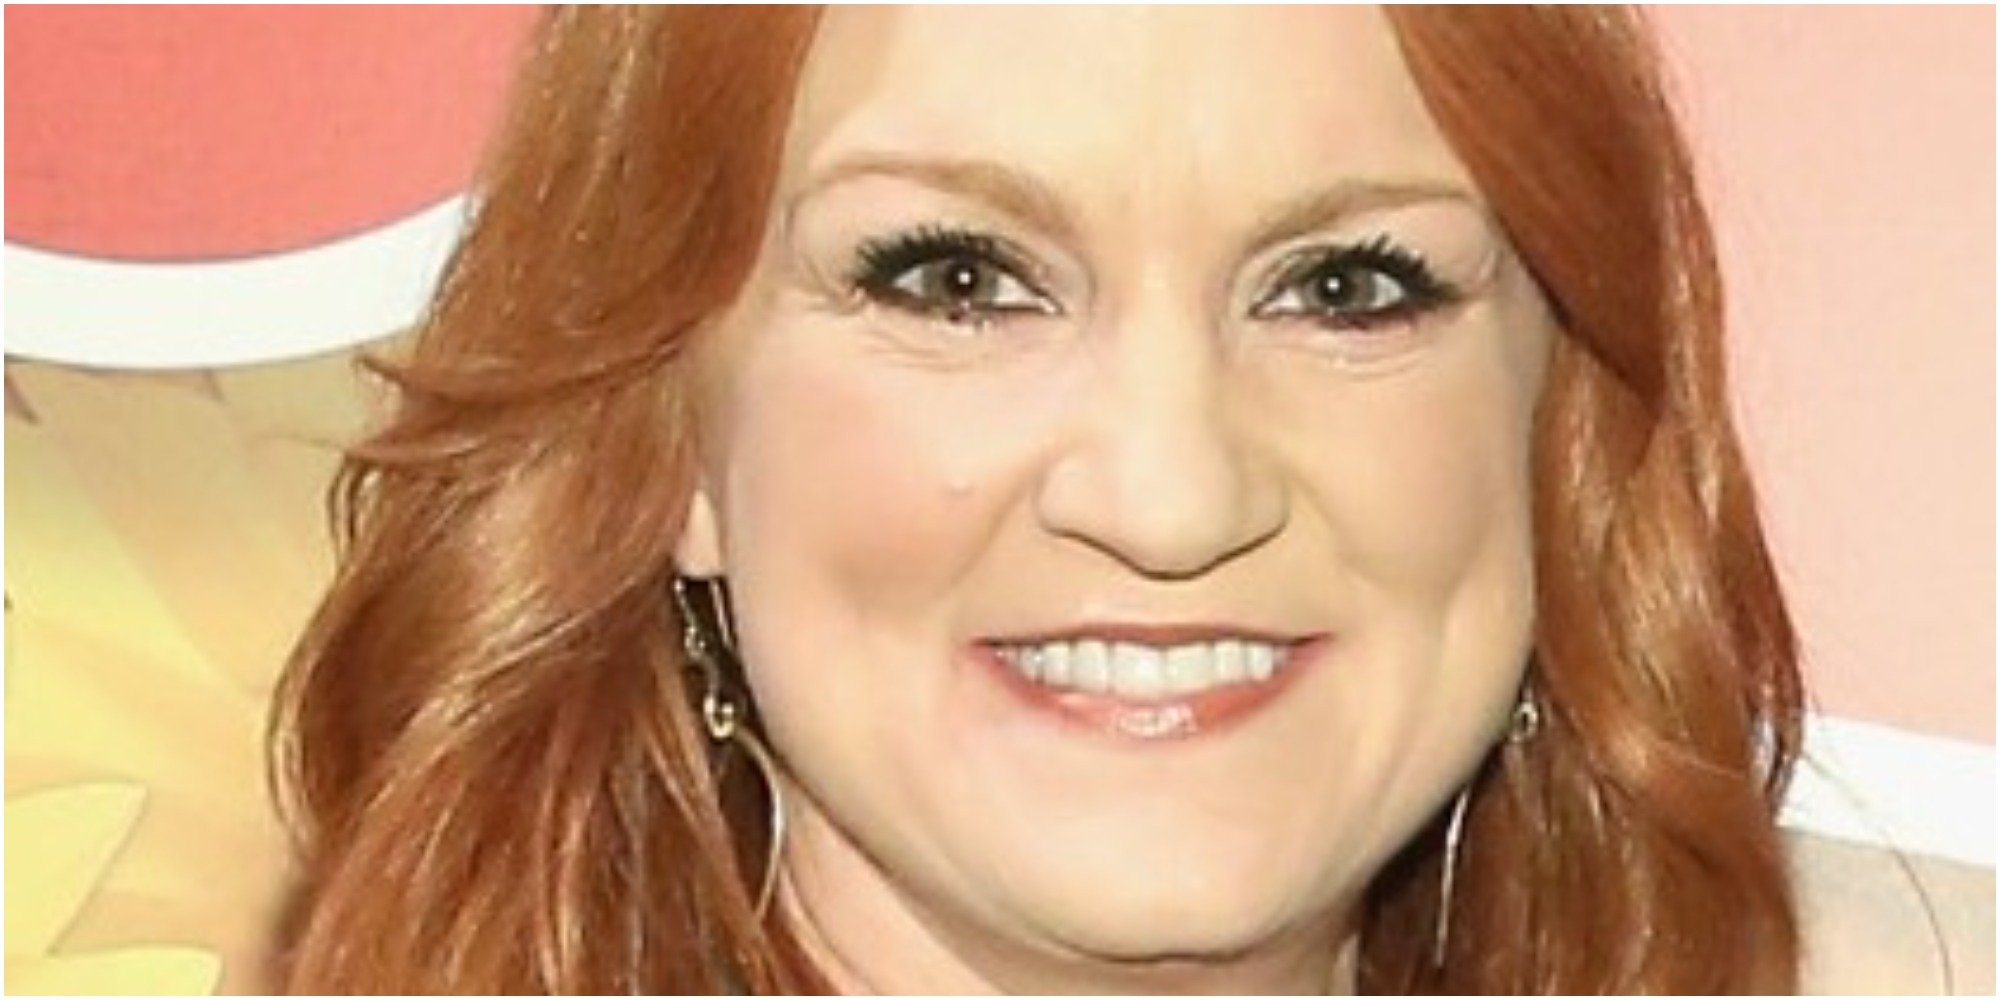 ‘The Pioneer Woman’: Ree Drummond’s Pantry Pasta Is 1 of the Most Popular Quick Recipes From Her Food Network Series For This Reason